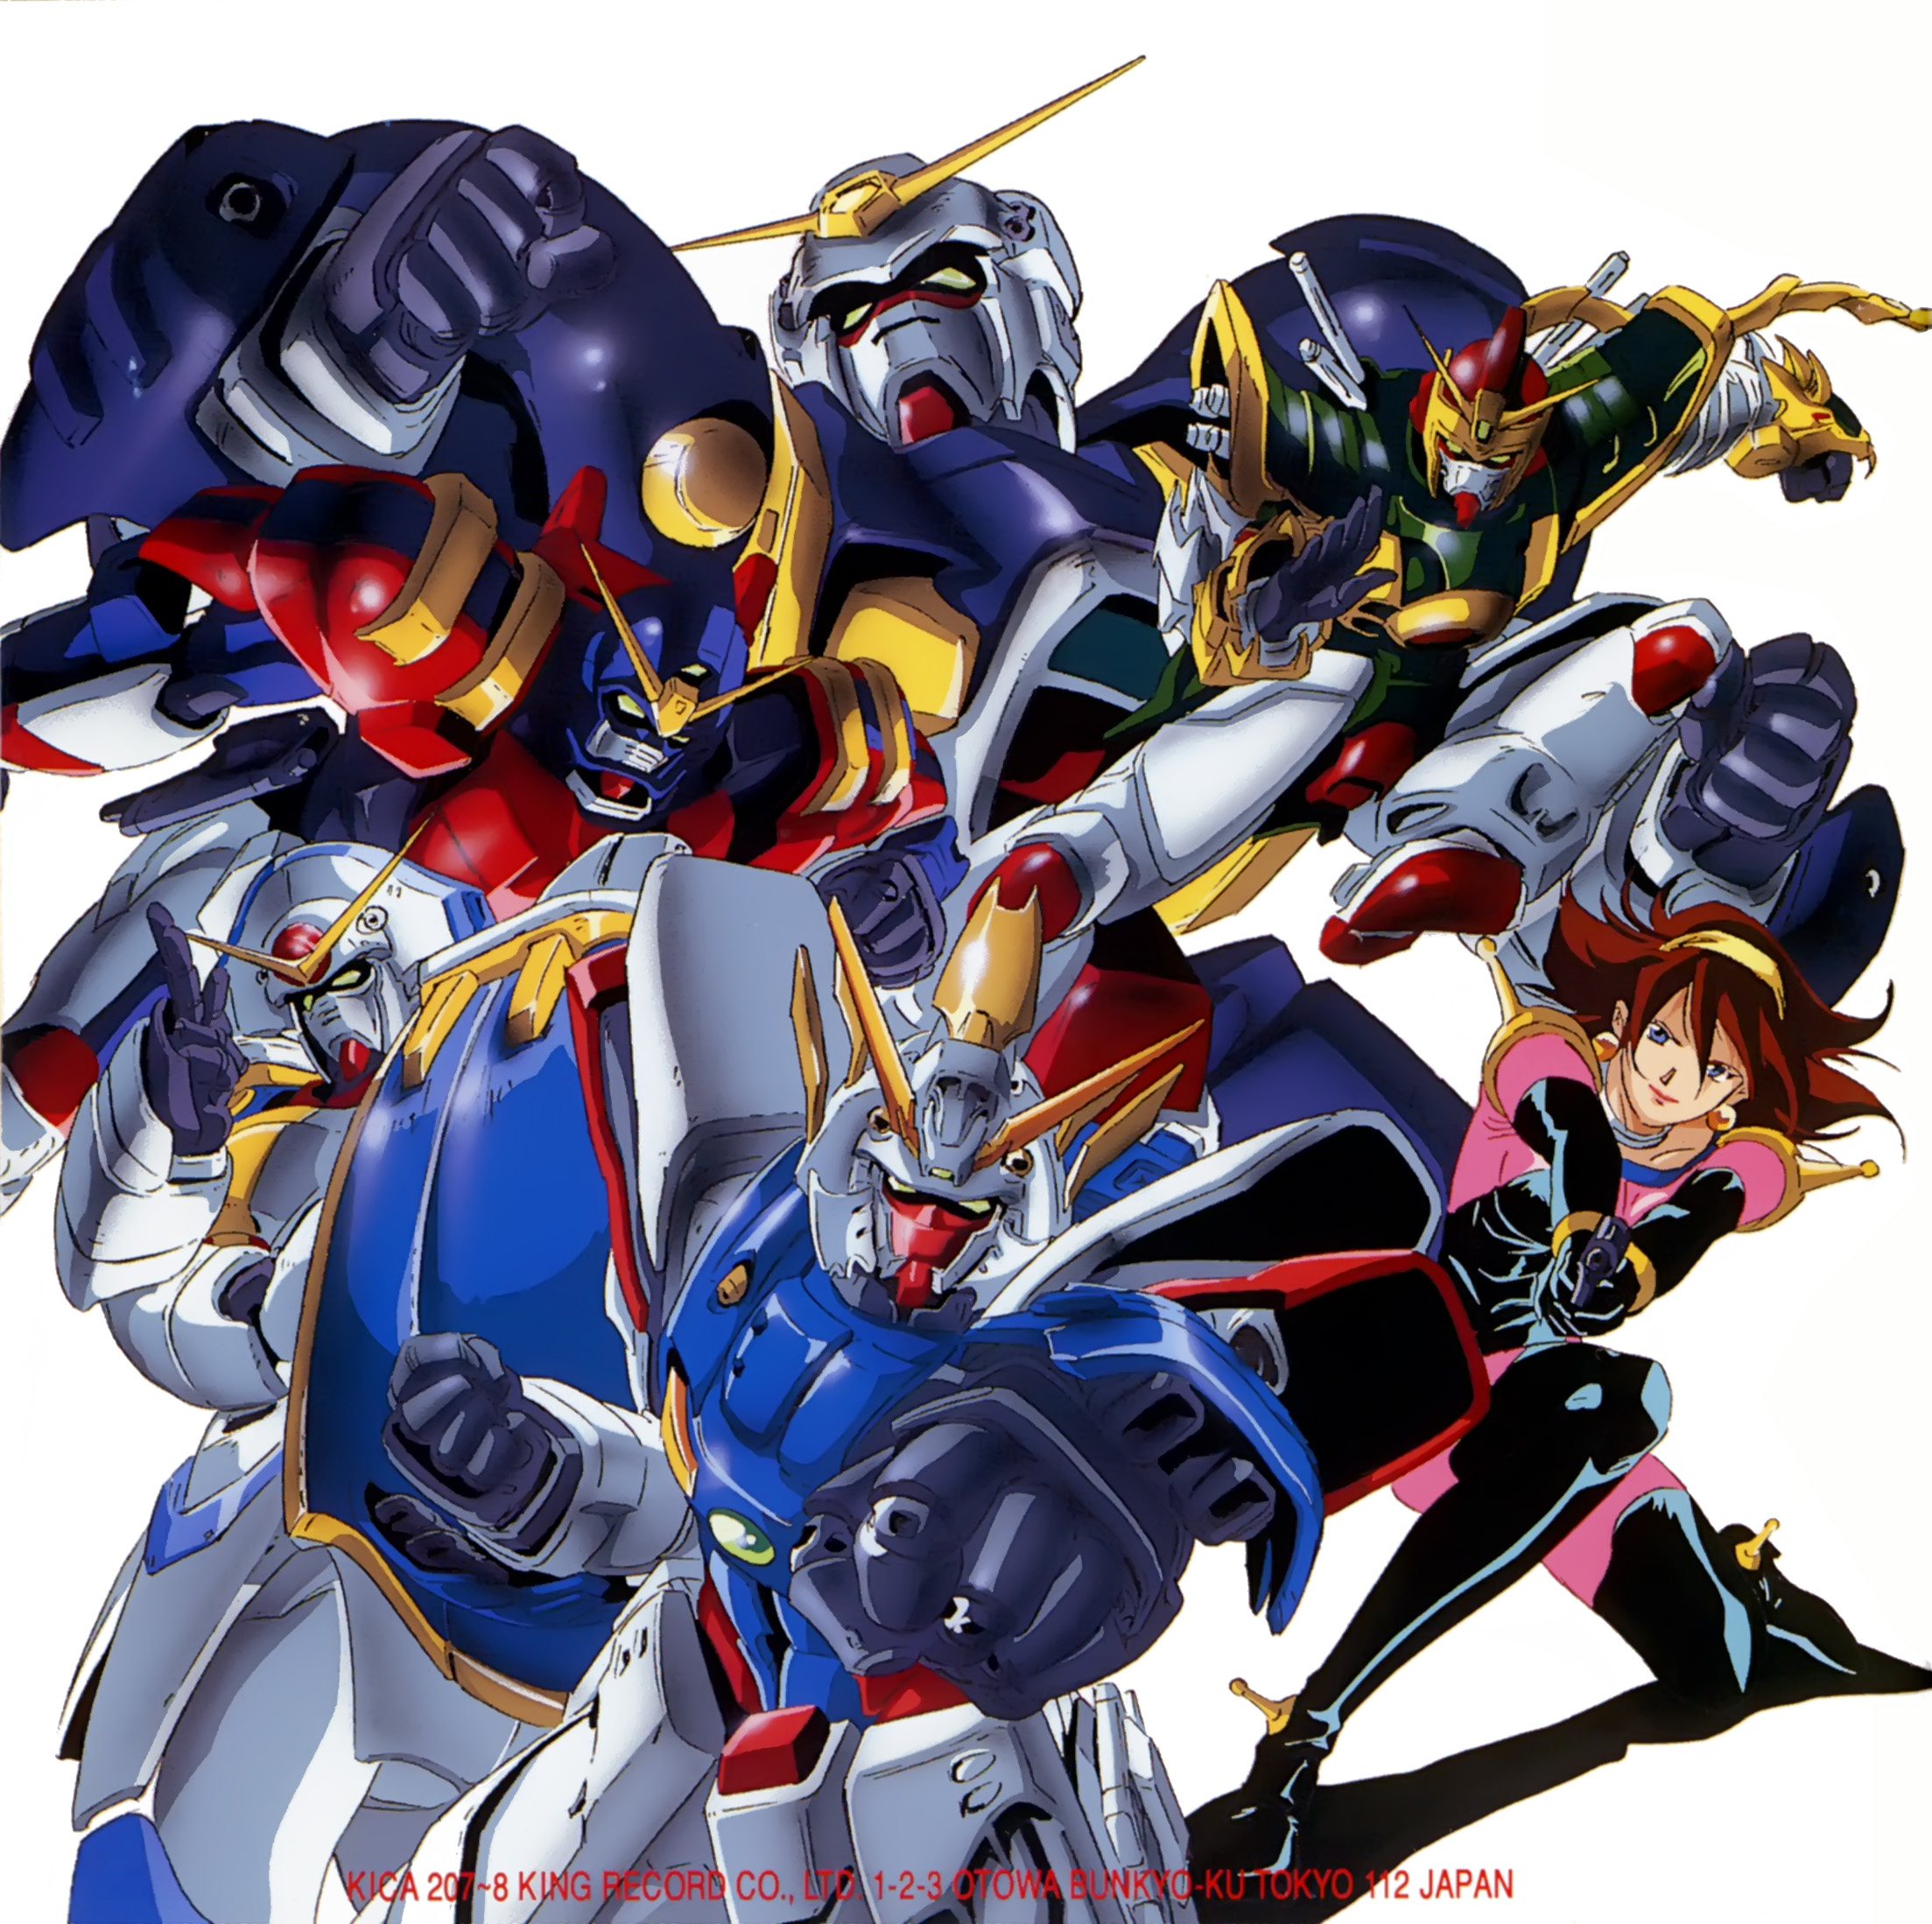 Free download Image of Mobile Fighter G Gundam Anime Vice [2207x2198 ...